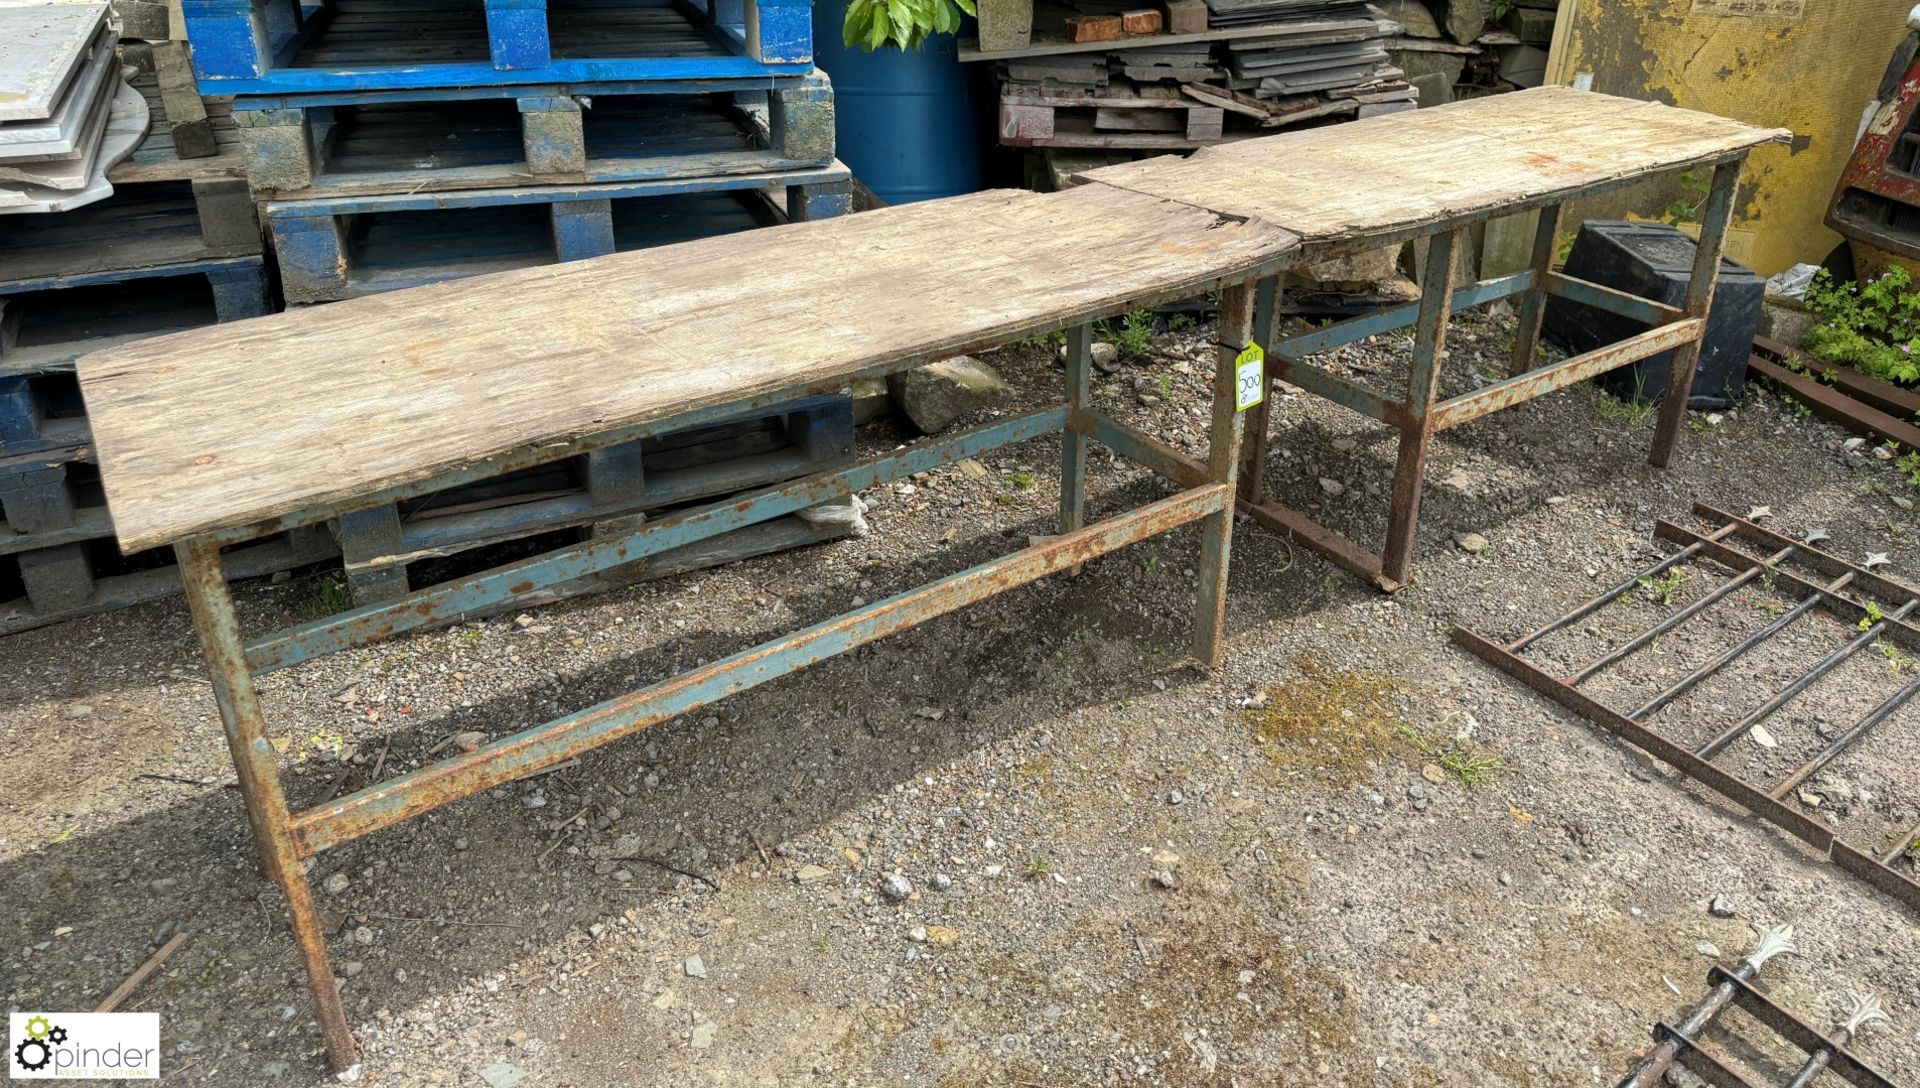 A reclaimed metal and wooden Workbench, approx. 34in x 24in x 126in - Image 5 of 6